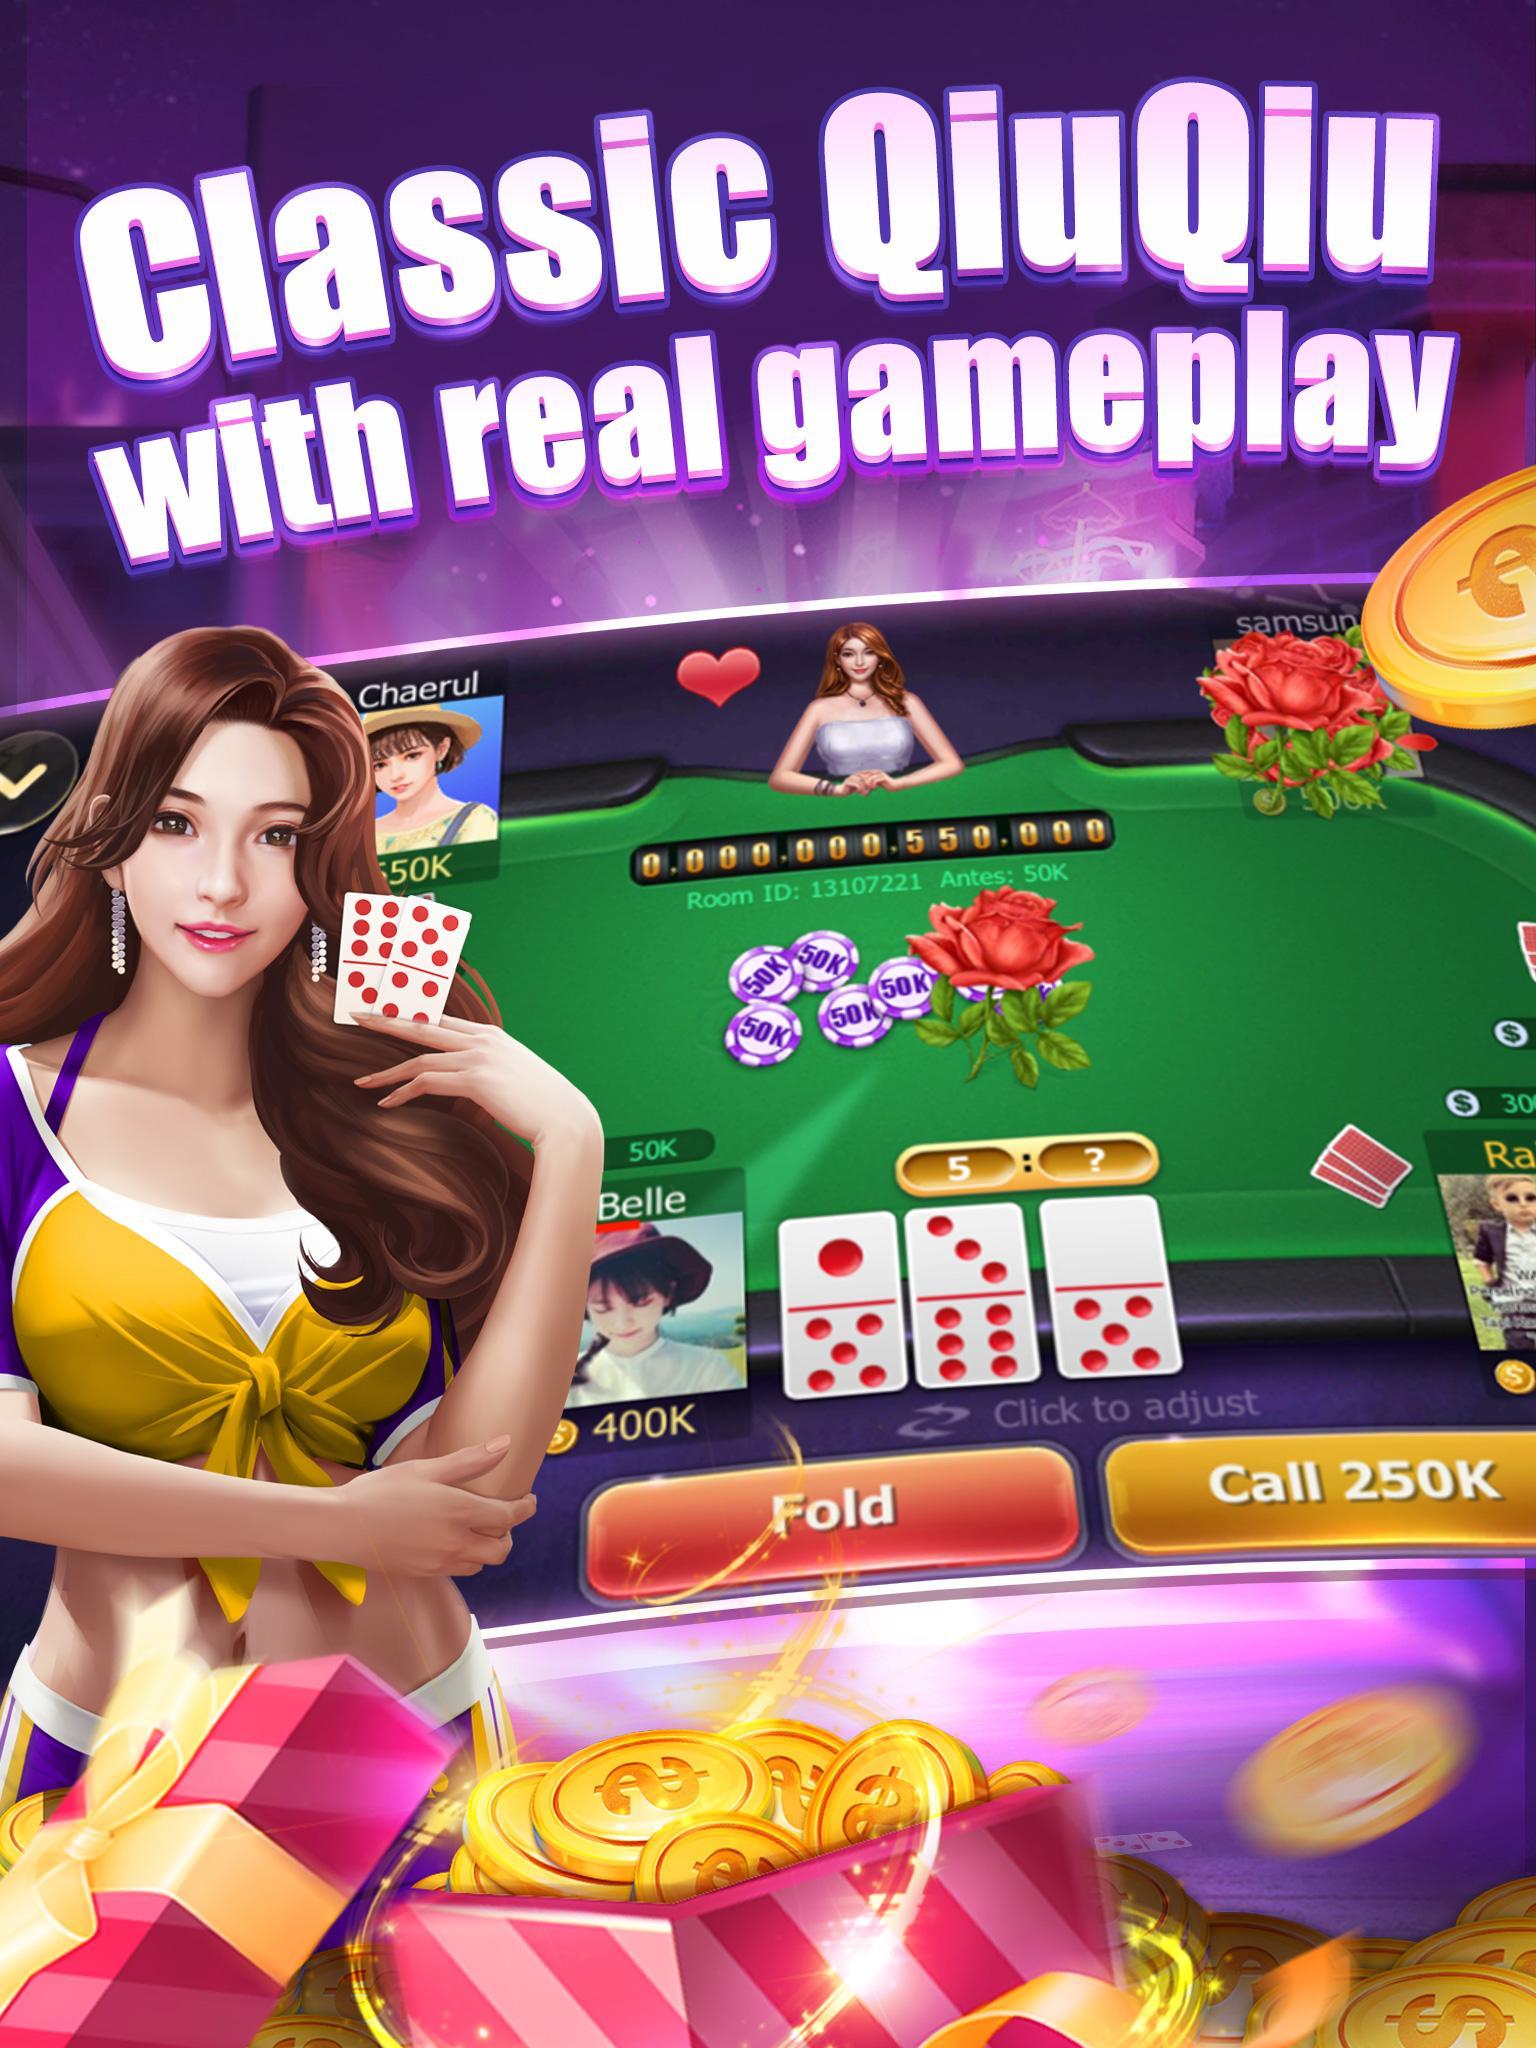 Read more about the article Download Game Domino Qiu Qiu Online Untuk Android, Gaple Capsa Susun: QiuQiu(99)/Texas Remi Online<div class="yasr-vv-stars-title-container"><div class='yasr-stars-title yasr-rater-stars'
                          id='yasr-visitor-votes-readonly-rater-176cbe38ebbef'
                          data-rating='0'
                          data-rater-starsize='16'
                          data-rater-postid='2298'
                          data-rater-readonly='true'
                          data-readonly-attribute='true'
                      ></div><span class='yasr-stars-title-average'>0 (0)</span></div>